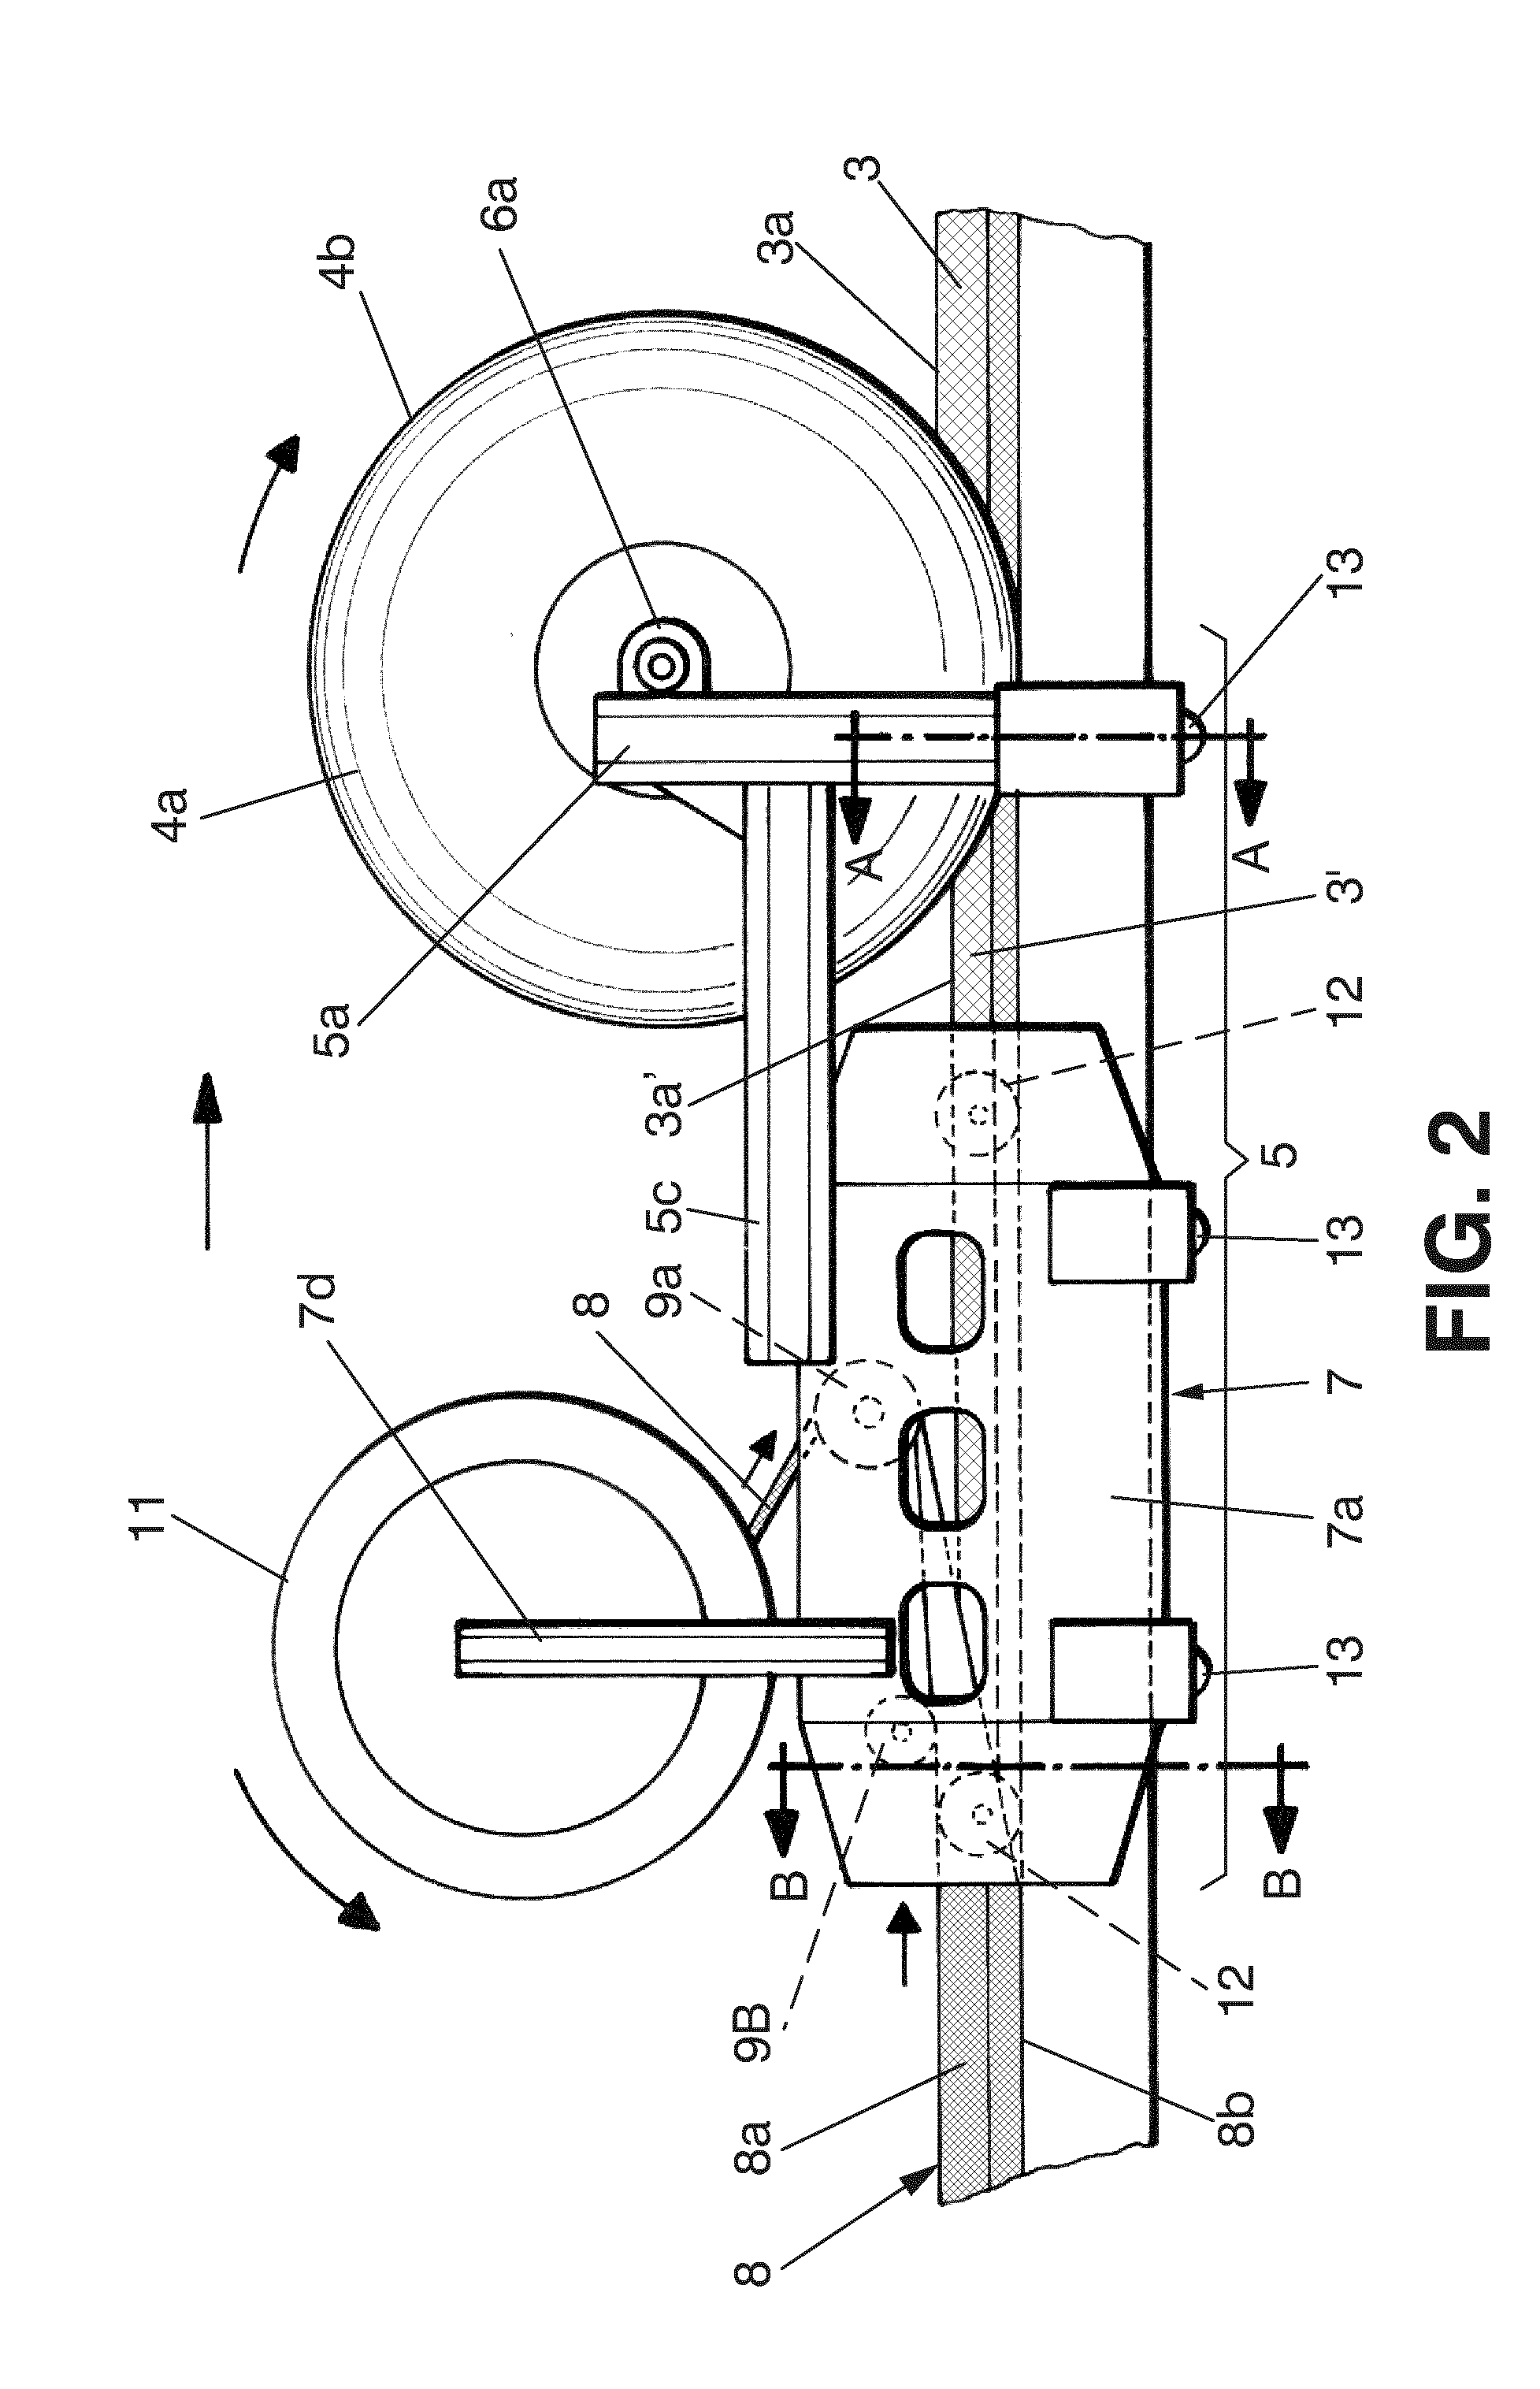 System for forming stacks of composite materials